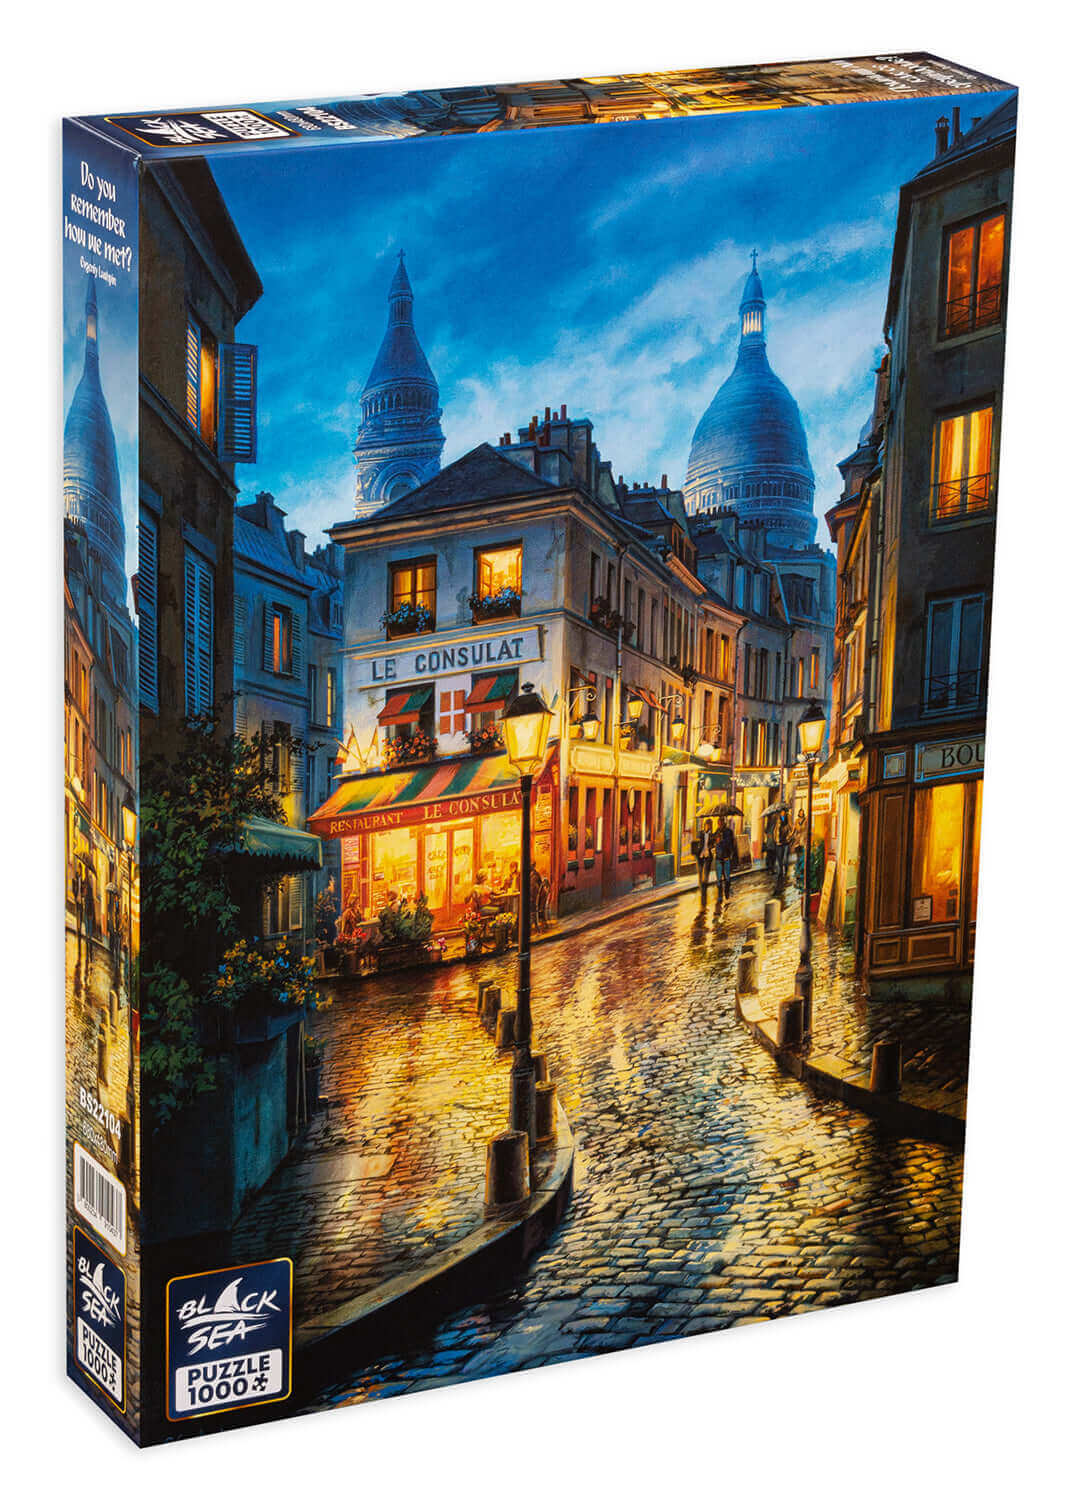 Puzzle Black Sea 1000 pieces - Do You Remember How We Met?, I remember how we met; I remember how your beauty glowed on the small square. The sun was setting but your smile brought light to everything. We walked along the wet street that wound between coz